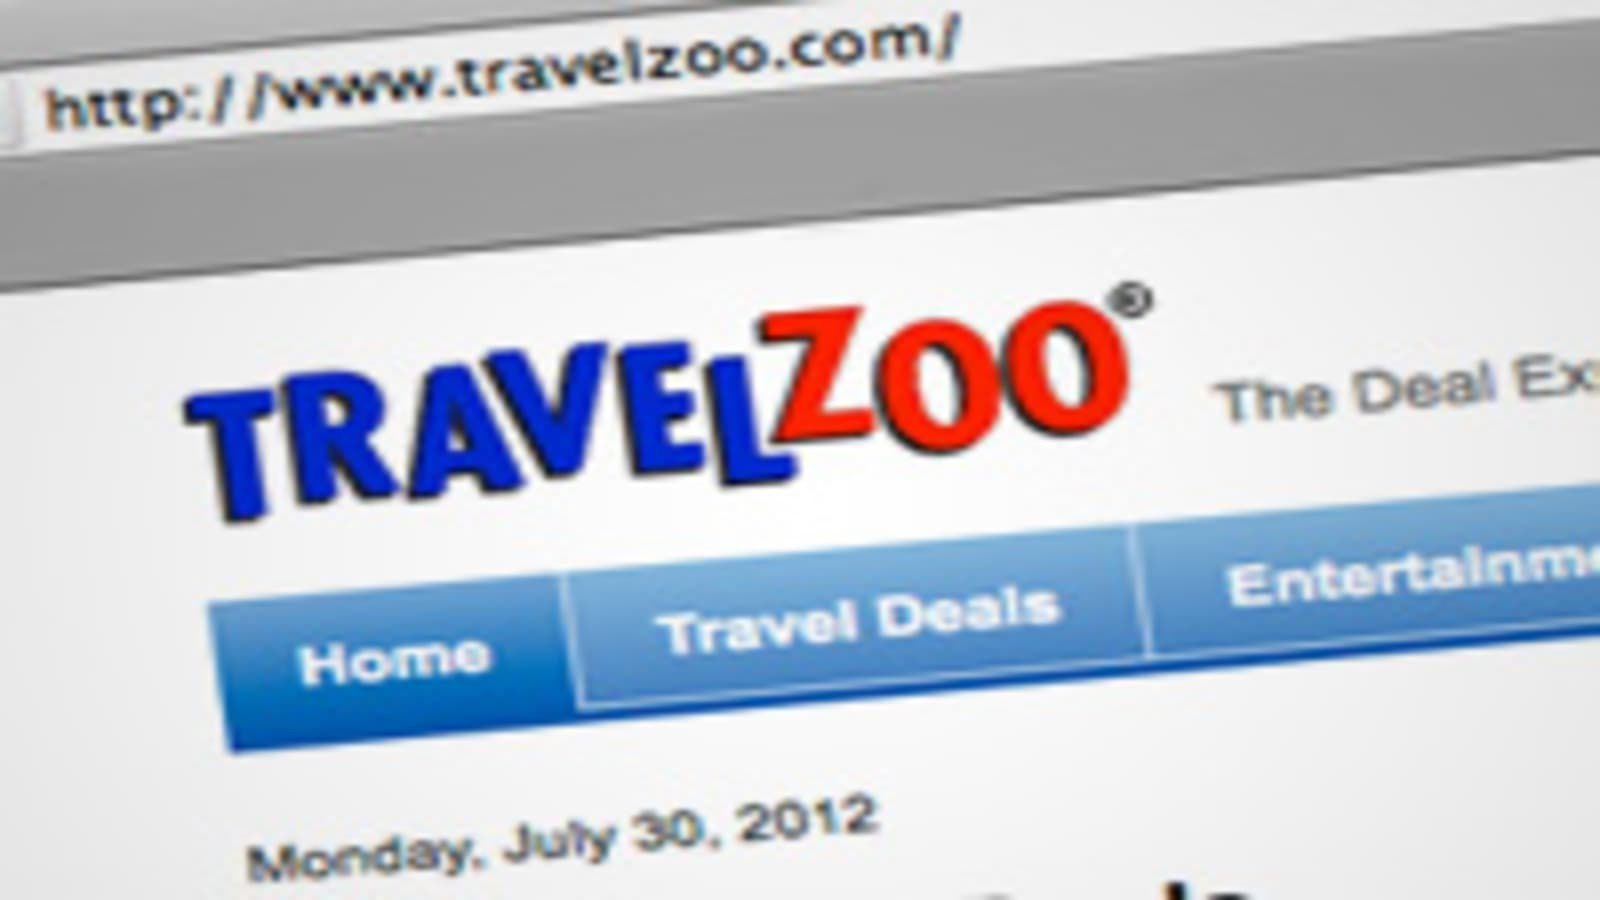 The Best Travel Sites For Finding Great Deals